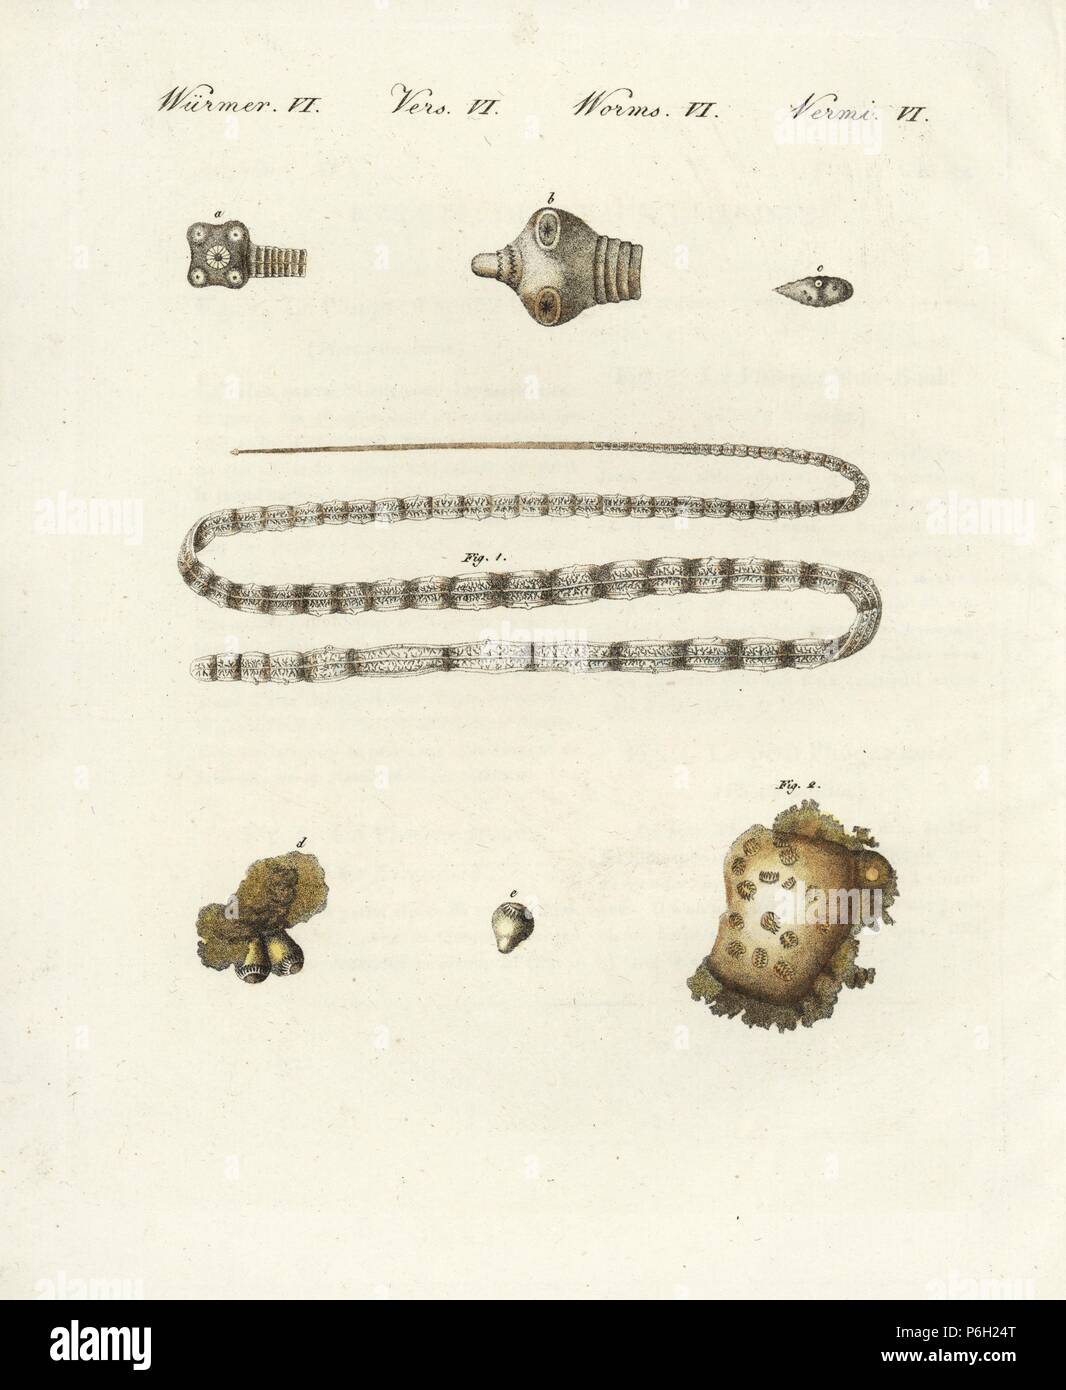 Intestinal worms: Pork tapeworm, Taenia solium 1,a,b,c, and human polycephalus, Polycephalus hominis 2,d,e. Handcoloured copperplate engraving from Friedrich Johann Bertuch's Bilderbuch fur Kinder (Picture Book for Children), Weimar, 1802. Stock Photo